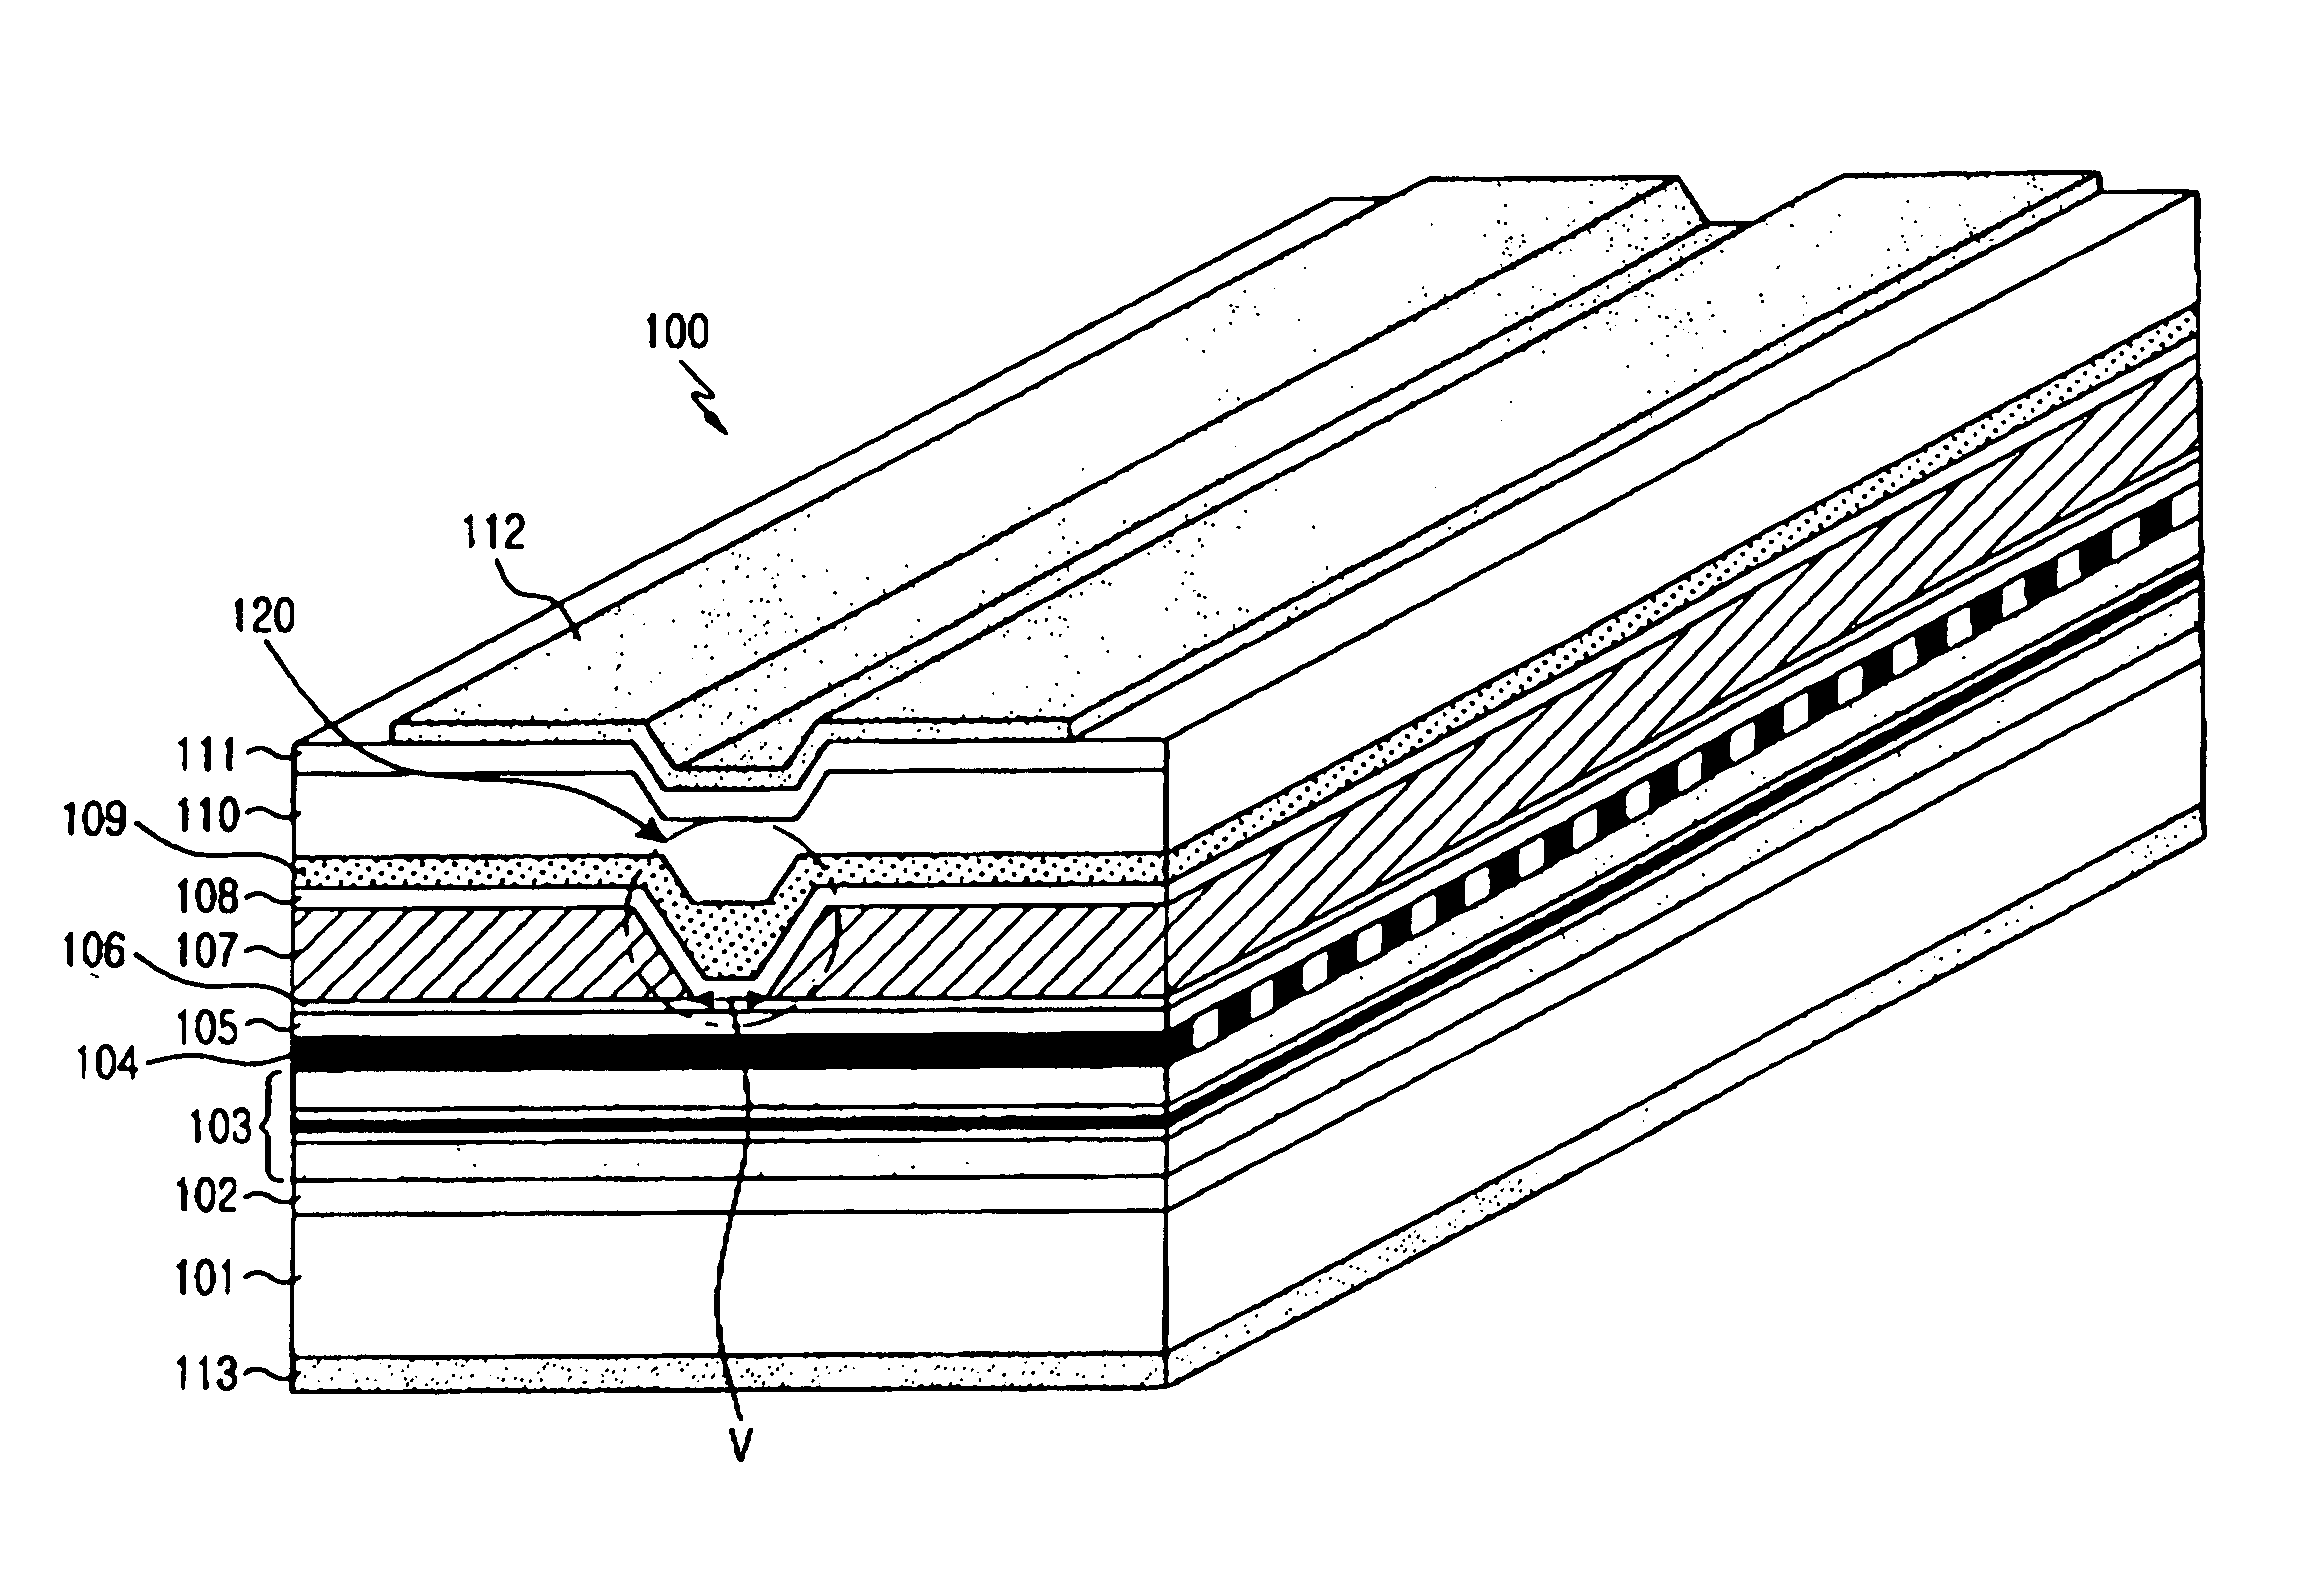 Semiconductor laser device and method of fabricating the same